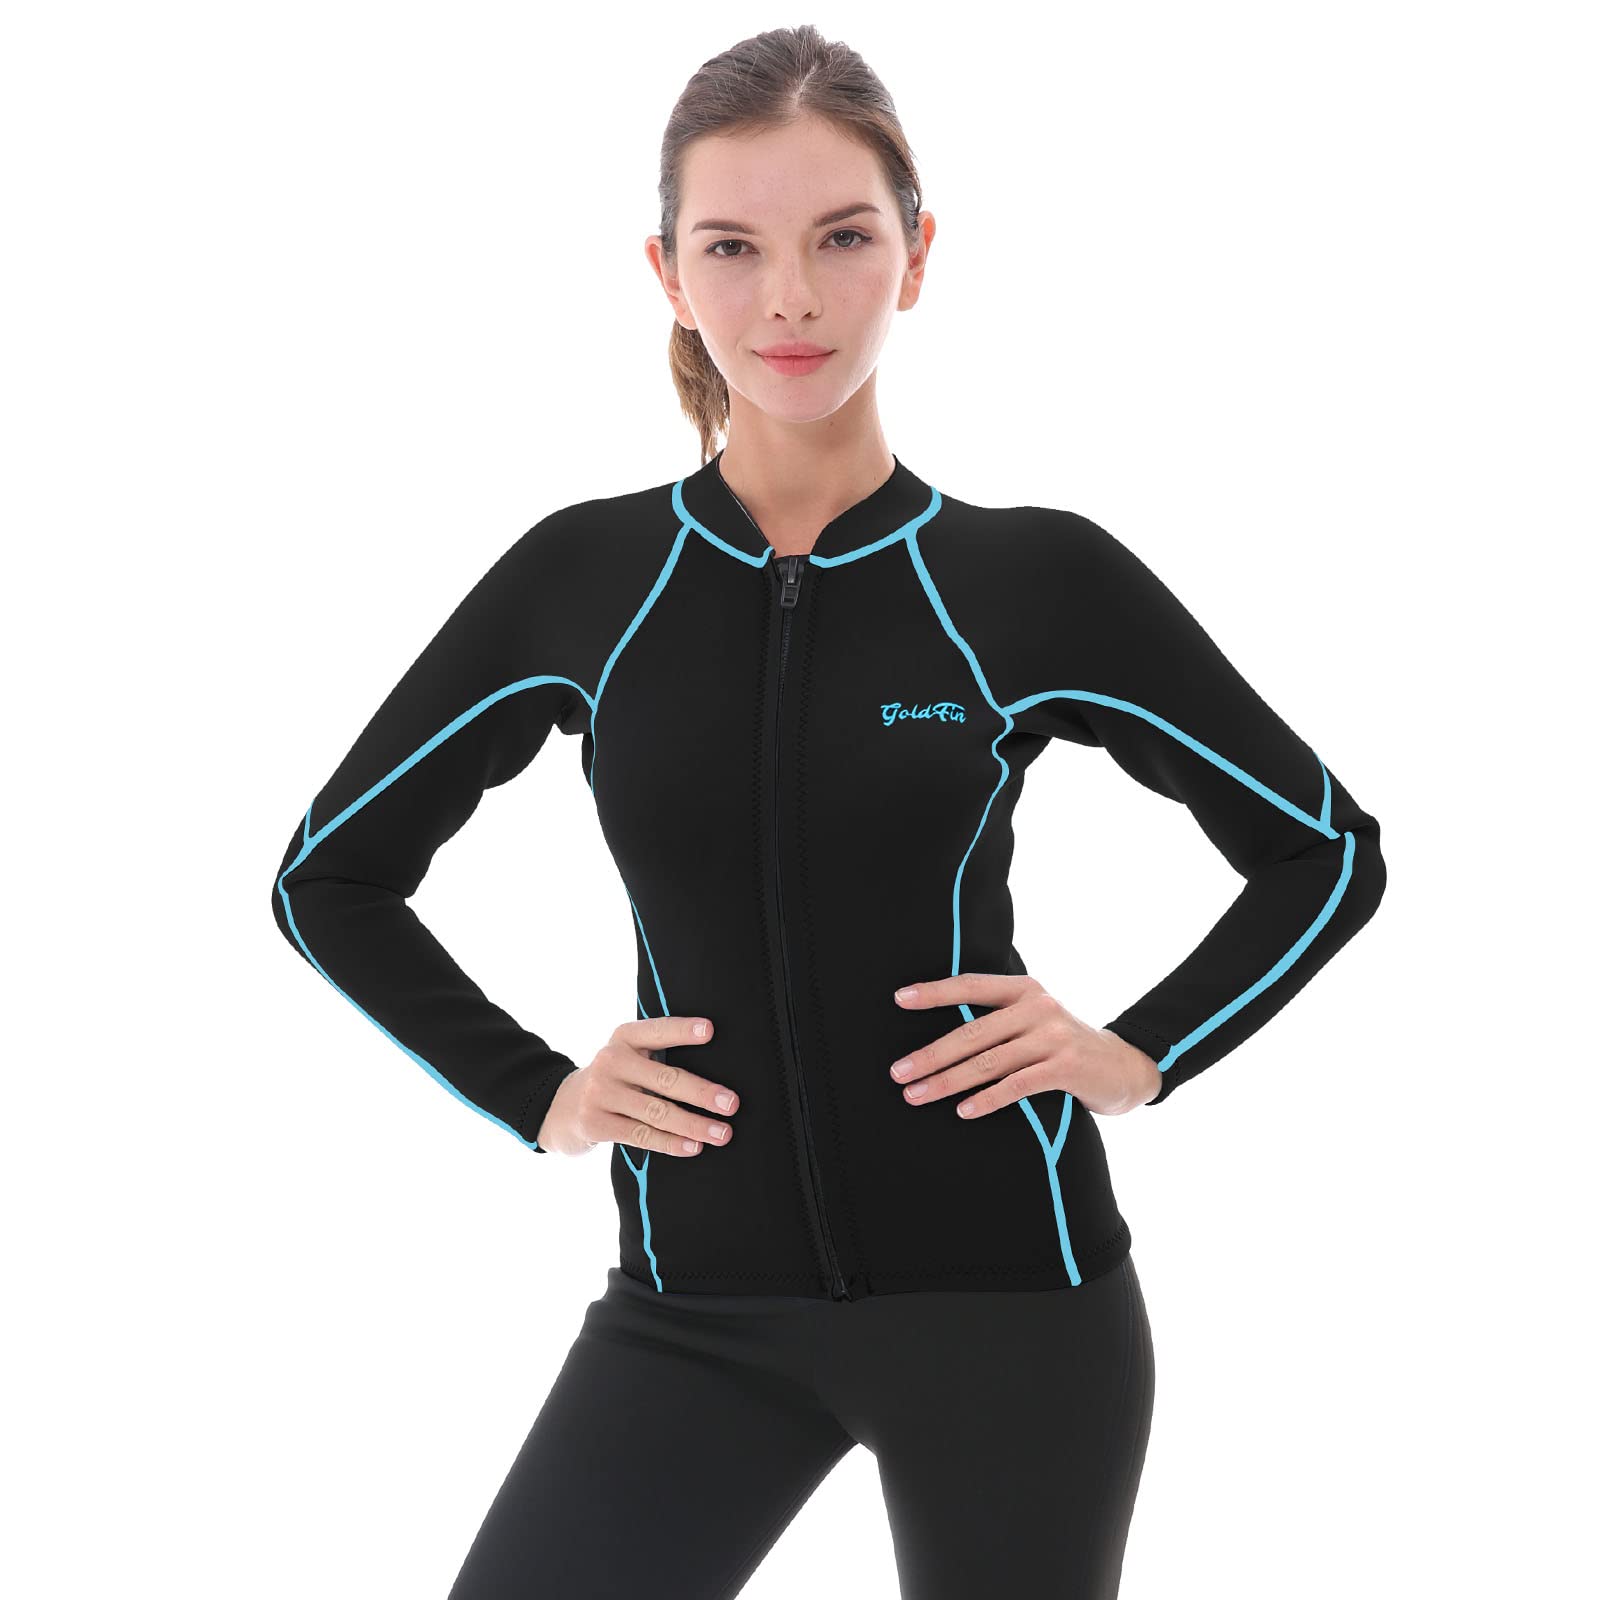  Women's Neoprene 2mm Wetsuit Top Thermal Swimsuit Long Sleeve  Diving Suit Surfing Jacket for Boating Snorkeling : Sports & Outdoors